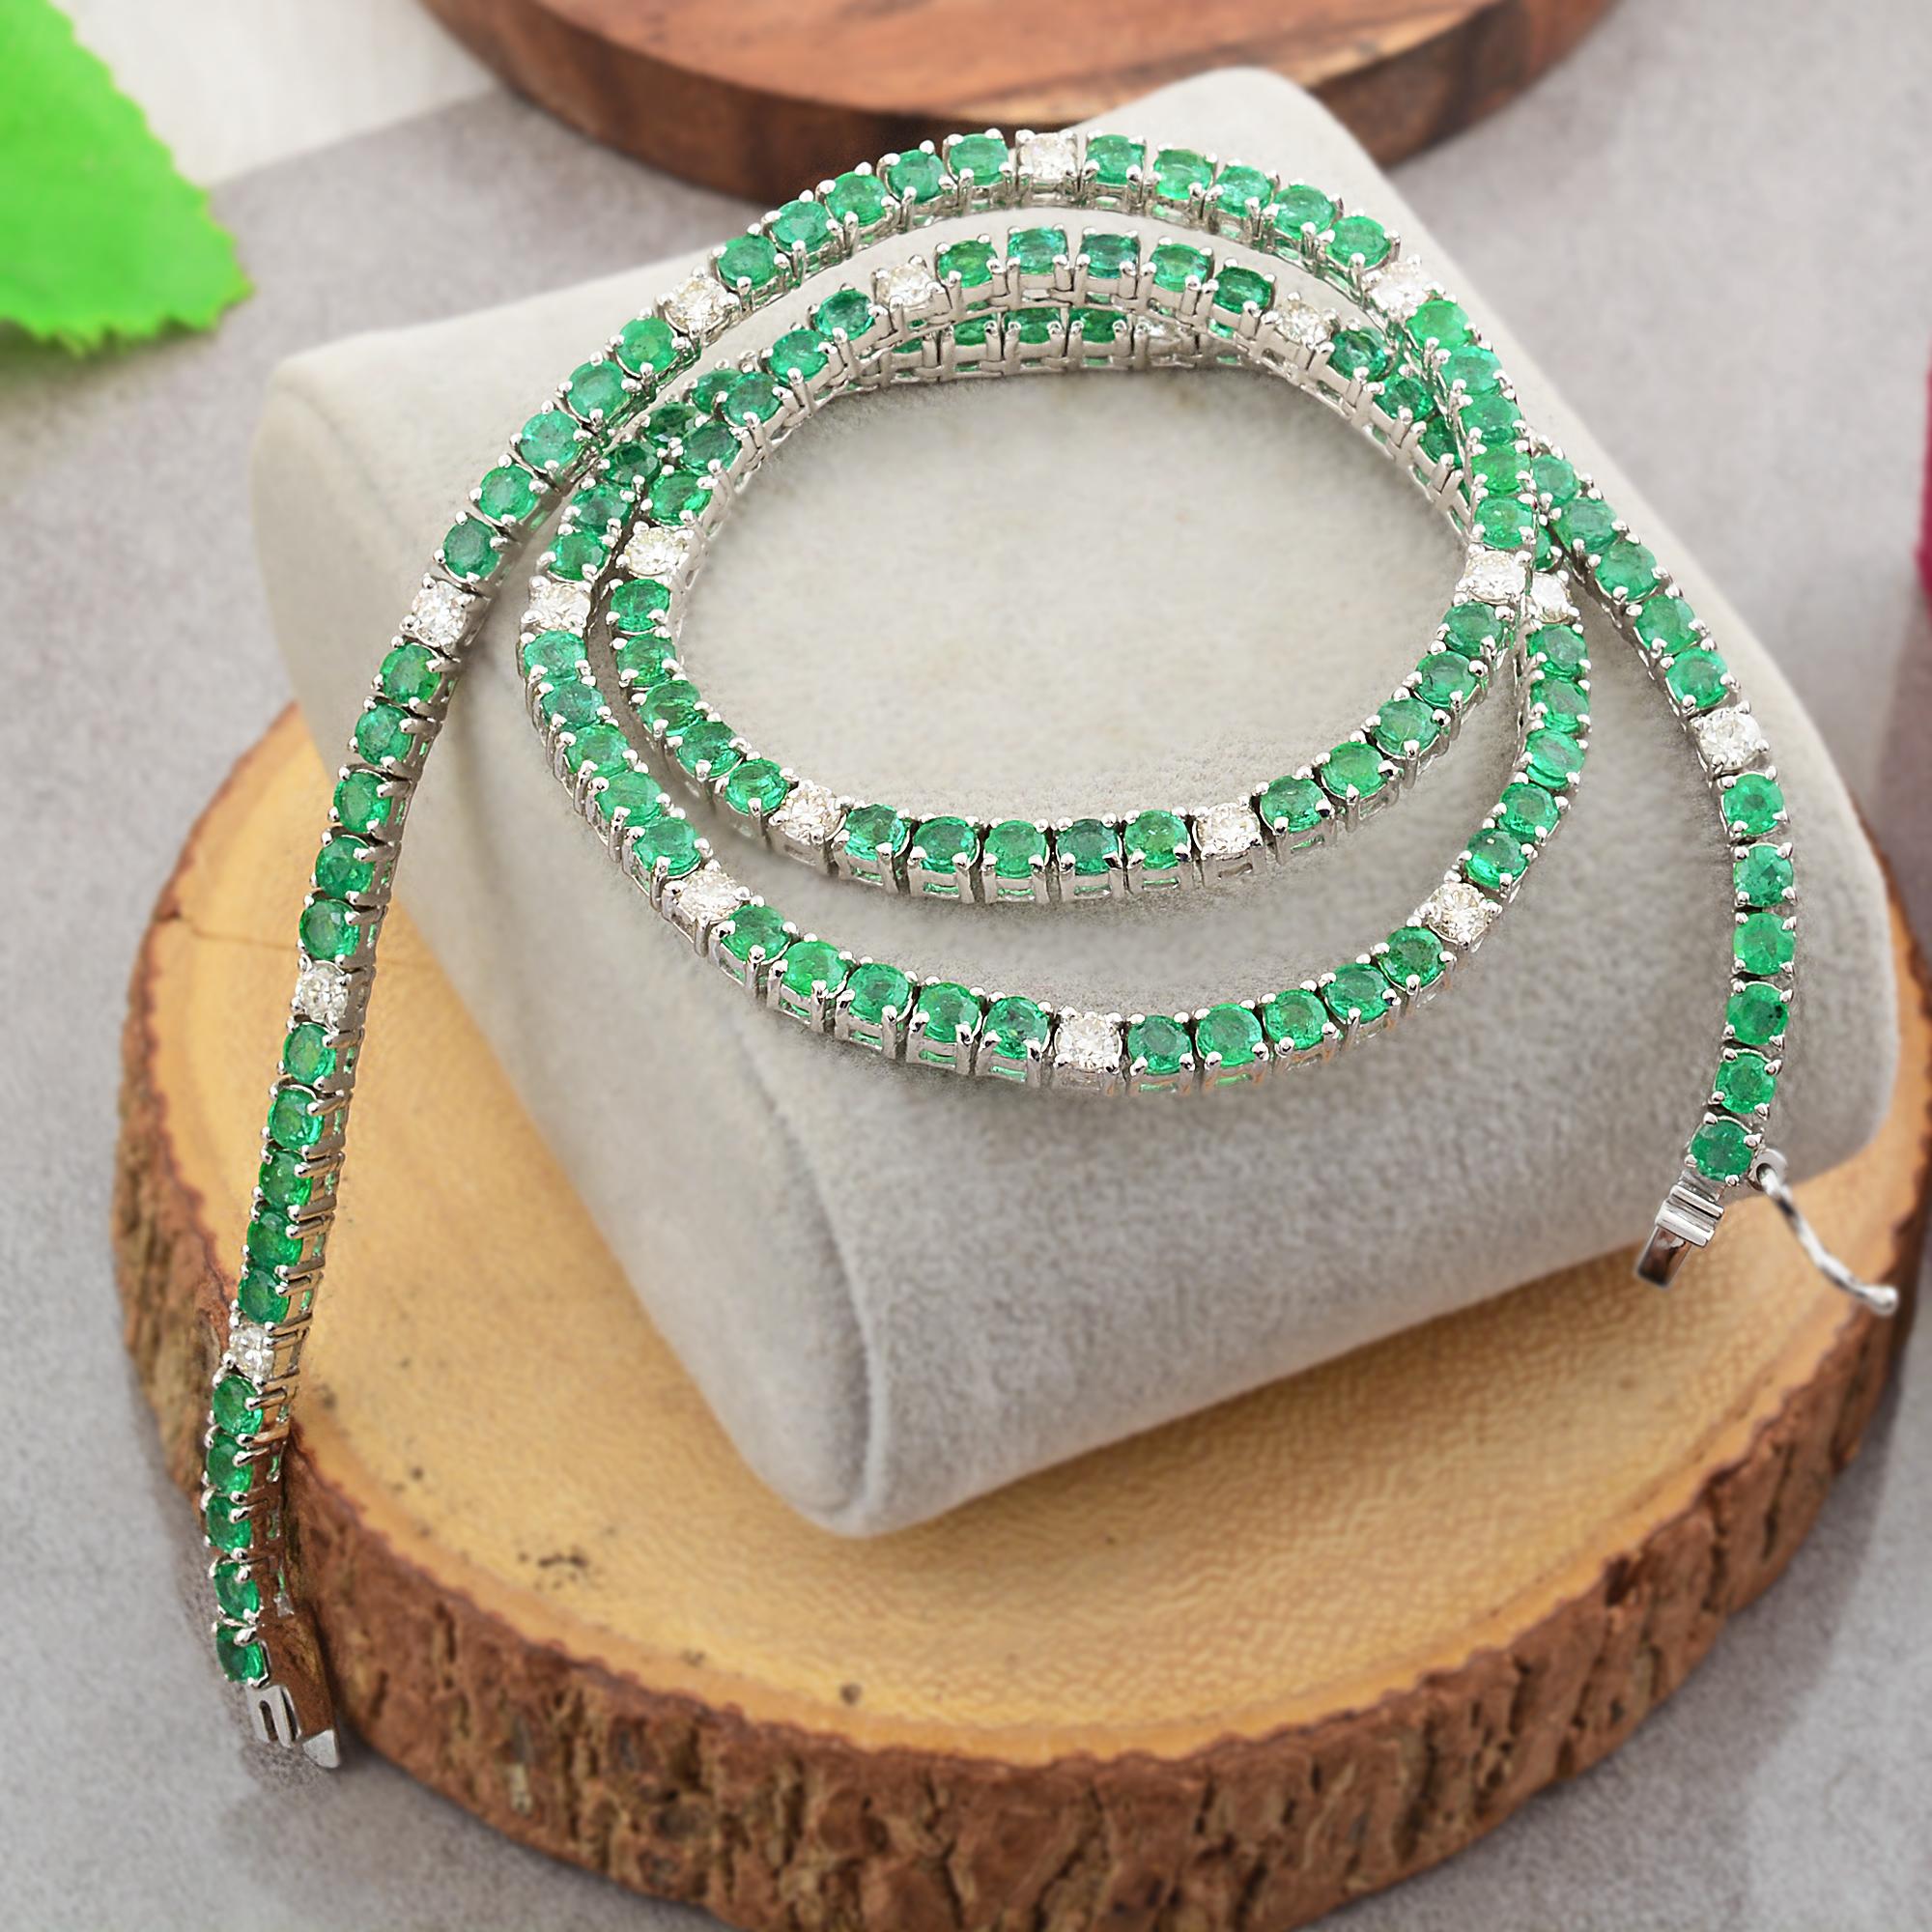 Looking for a piece of jewelry that combines classic elegance with modern sophistication? Look no further than this exquisite Gold Diamond & Emerald Tennis Necklace from our collection. Designed to fit comfortably around your neck, this Necklace is